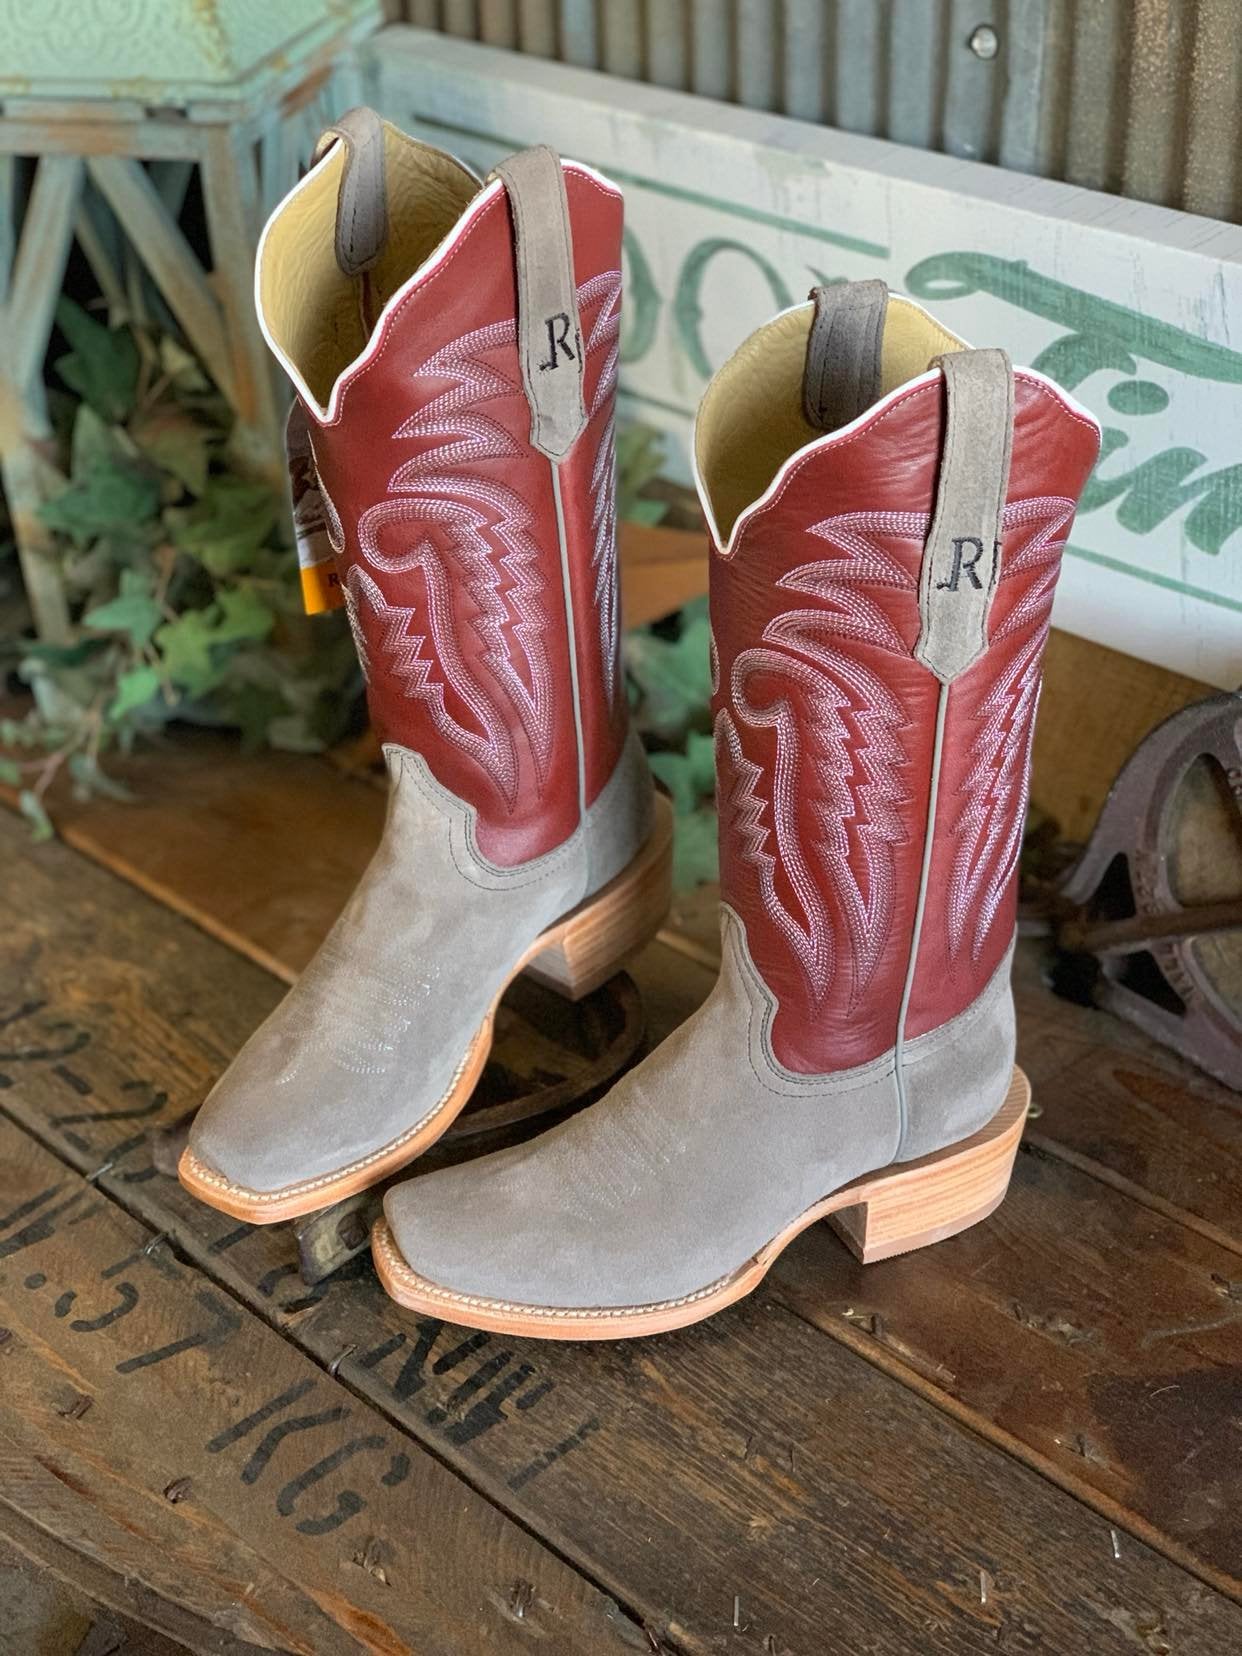 R. Watson Womens Charcoal Rough Out & Dark Cherry Sinatra Cowhide-Women's Boots-R. Watson-Lucky J Boots & More, Women's, Men's, & Kids Western Store Located in Carthage, MO